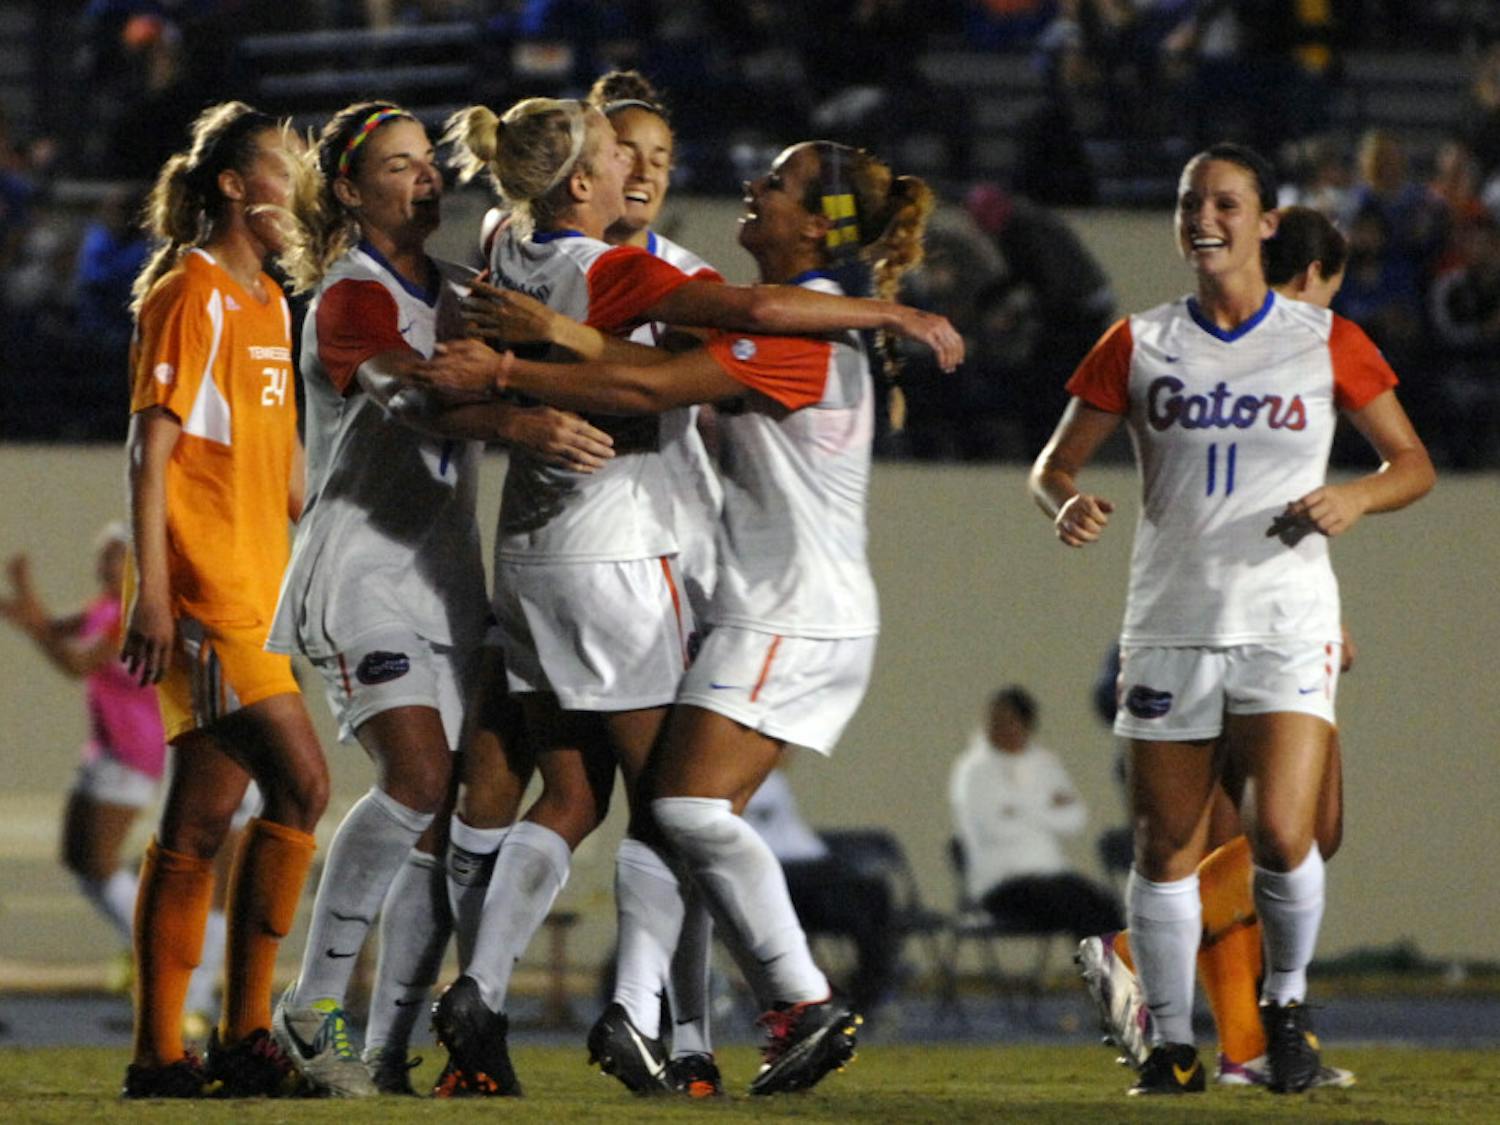 Players celebrate Tessa Andujar's goal during Florida's 3-1 win against Tennessee on Friday at James G. Pressly Stadium.